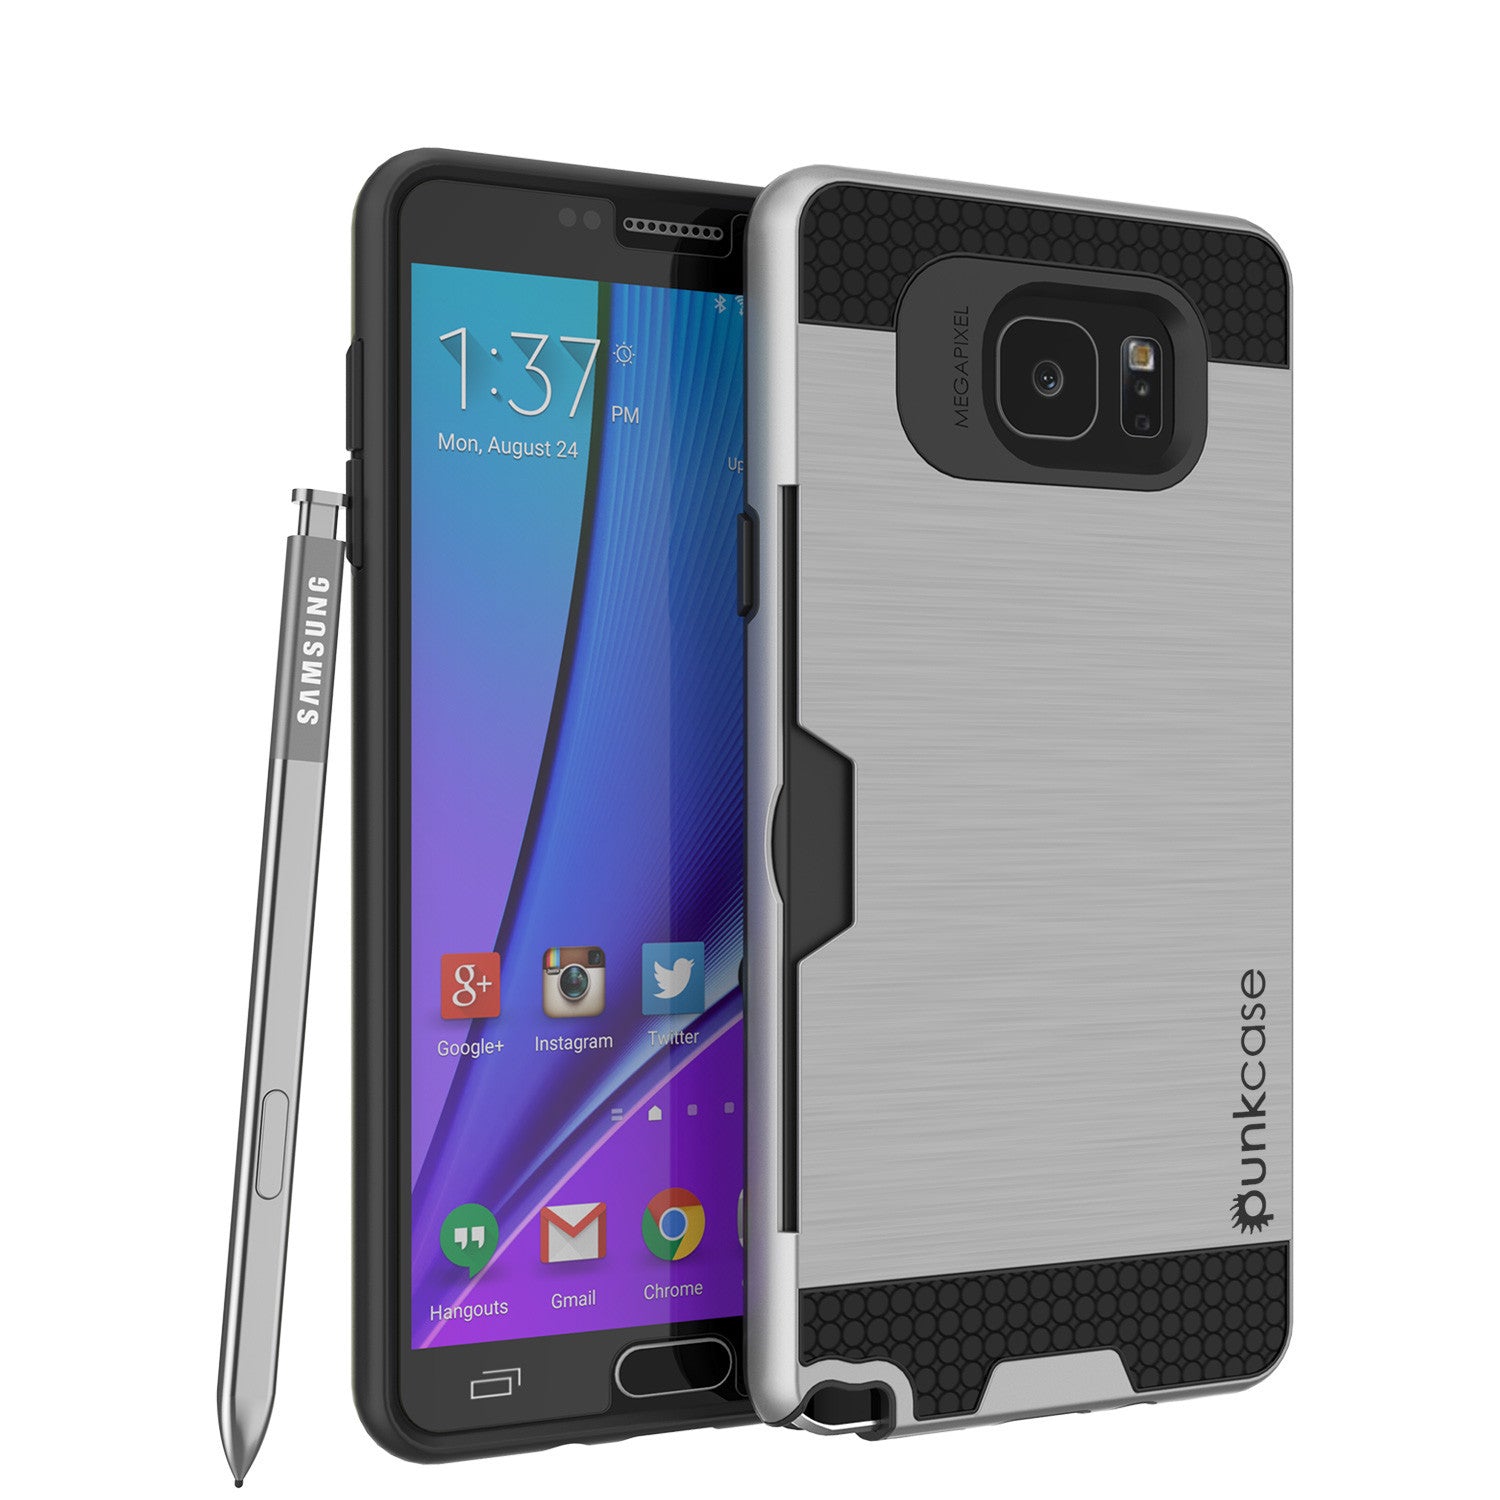 Galaxy Note 5 Case PunkCase SLOT Silver Series Slim Armor Soft Cover Case w/ Tempered Glass (Color in image: Silver)